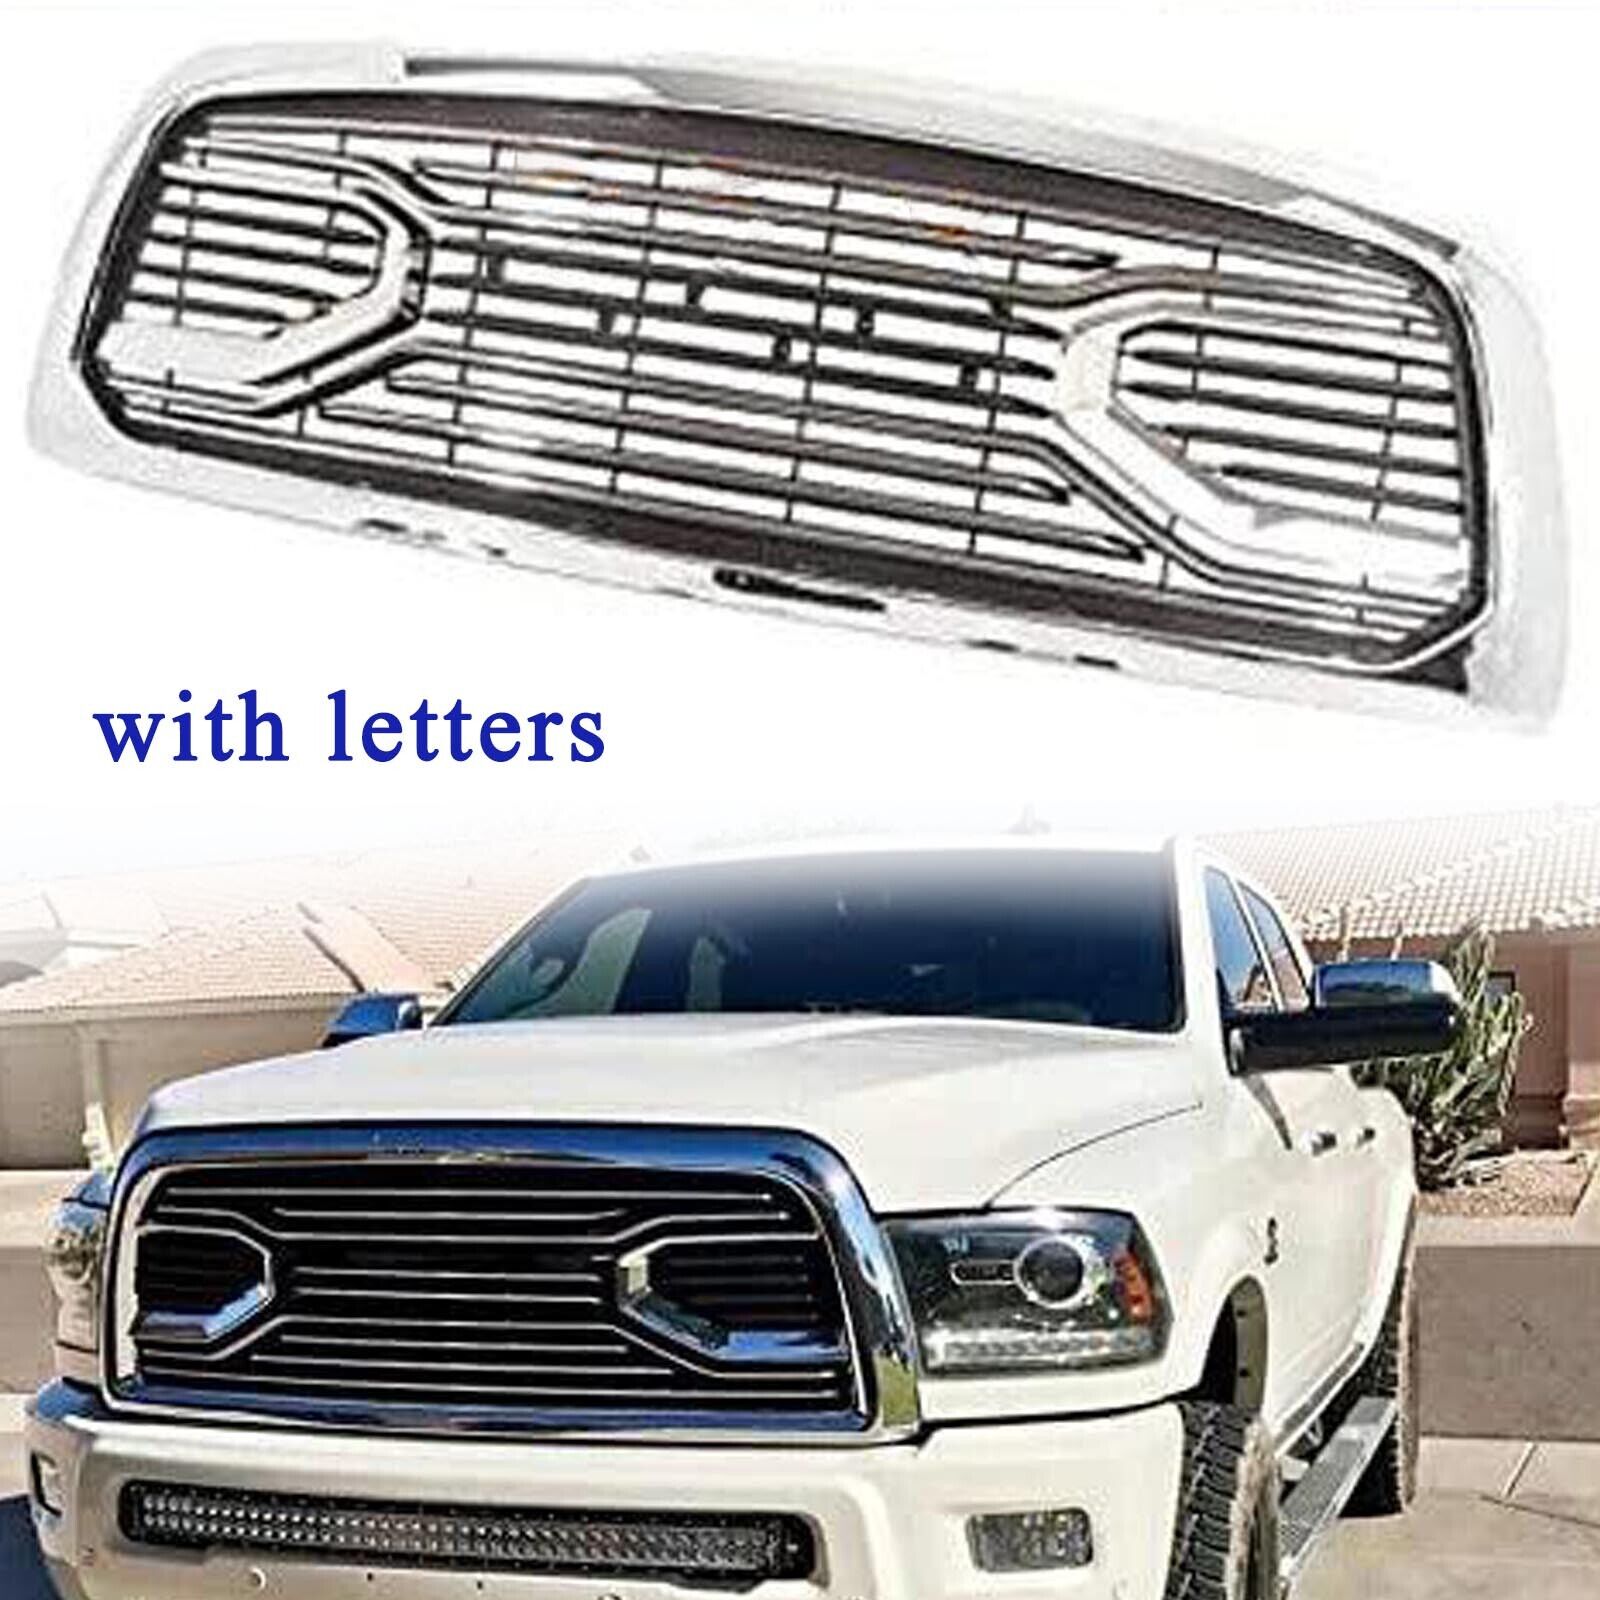 Front Grille For 2013-2018 Dodge RAM 2500 3500 Chrome Grill Big Horn W/Letters